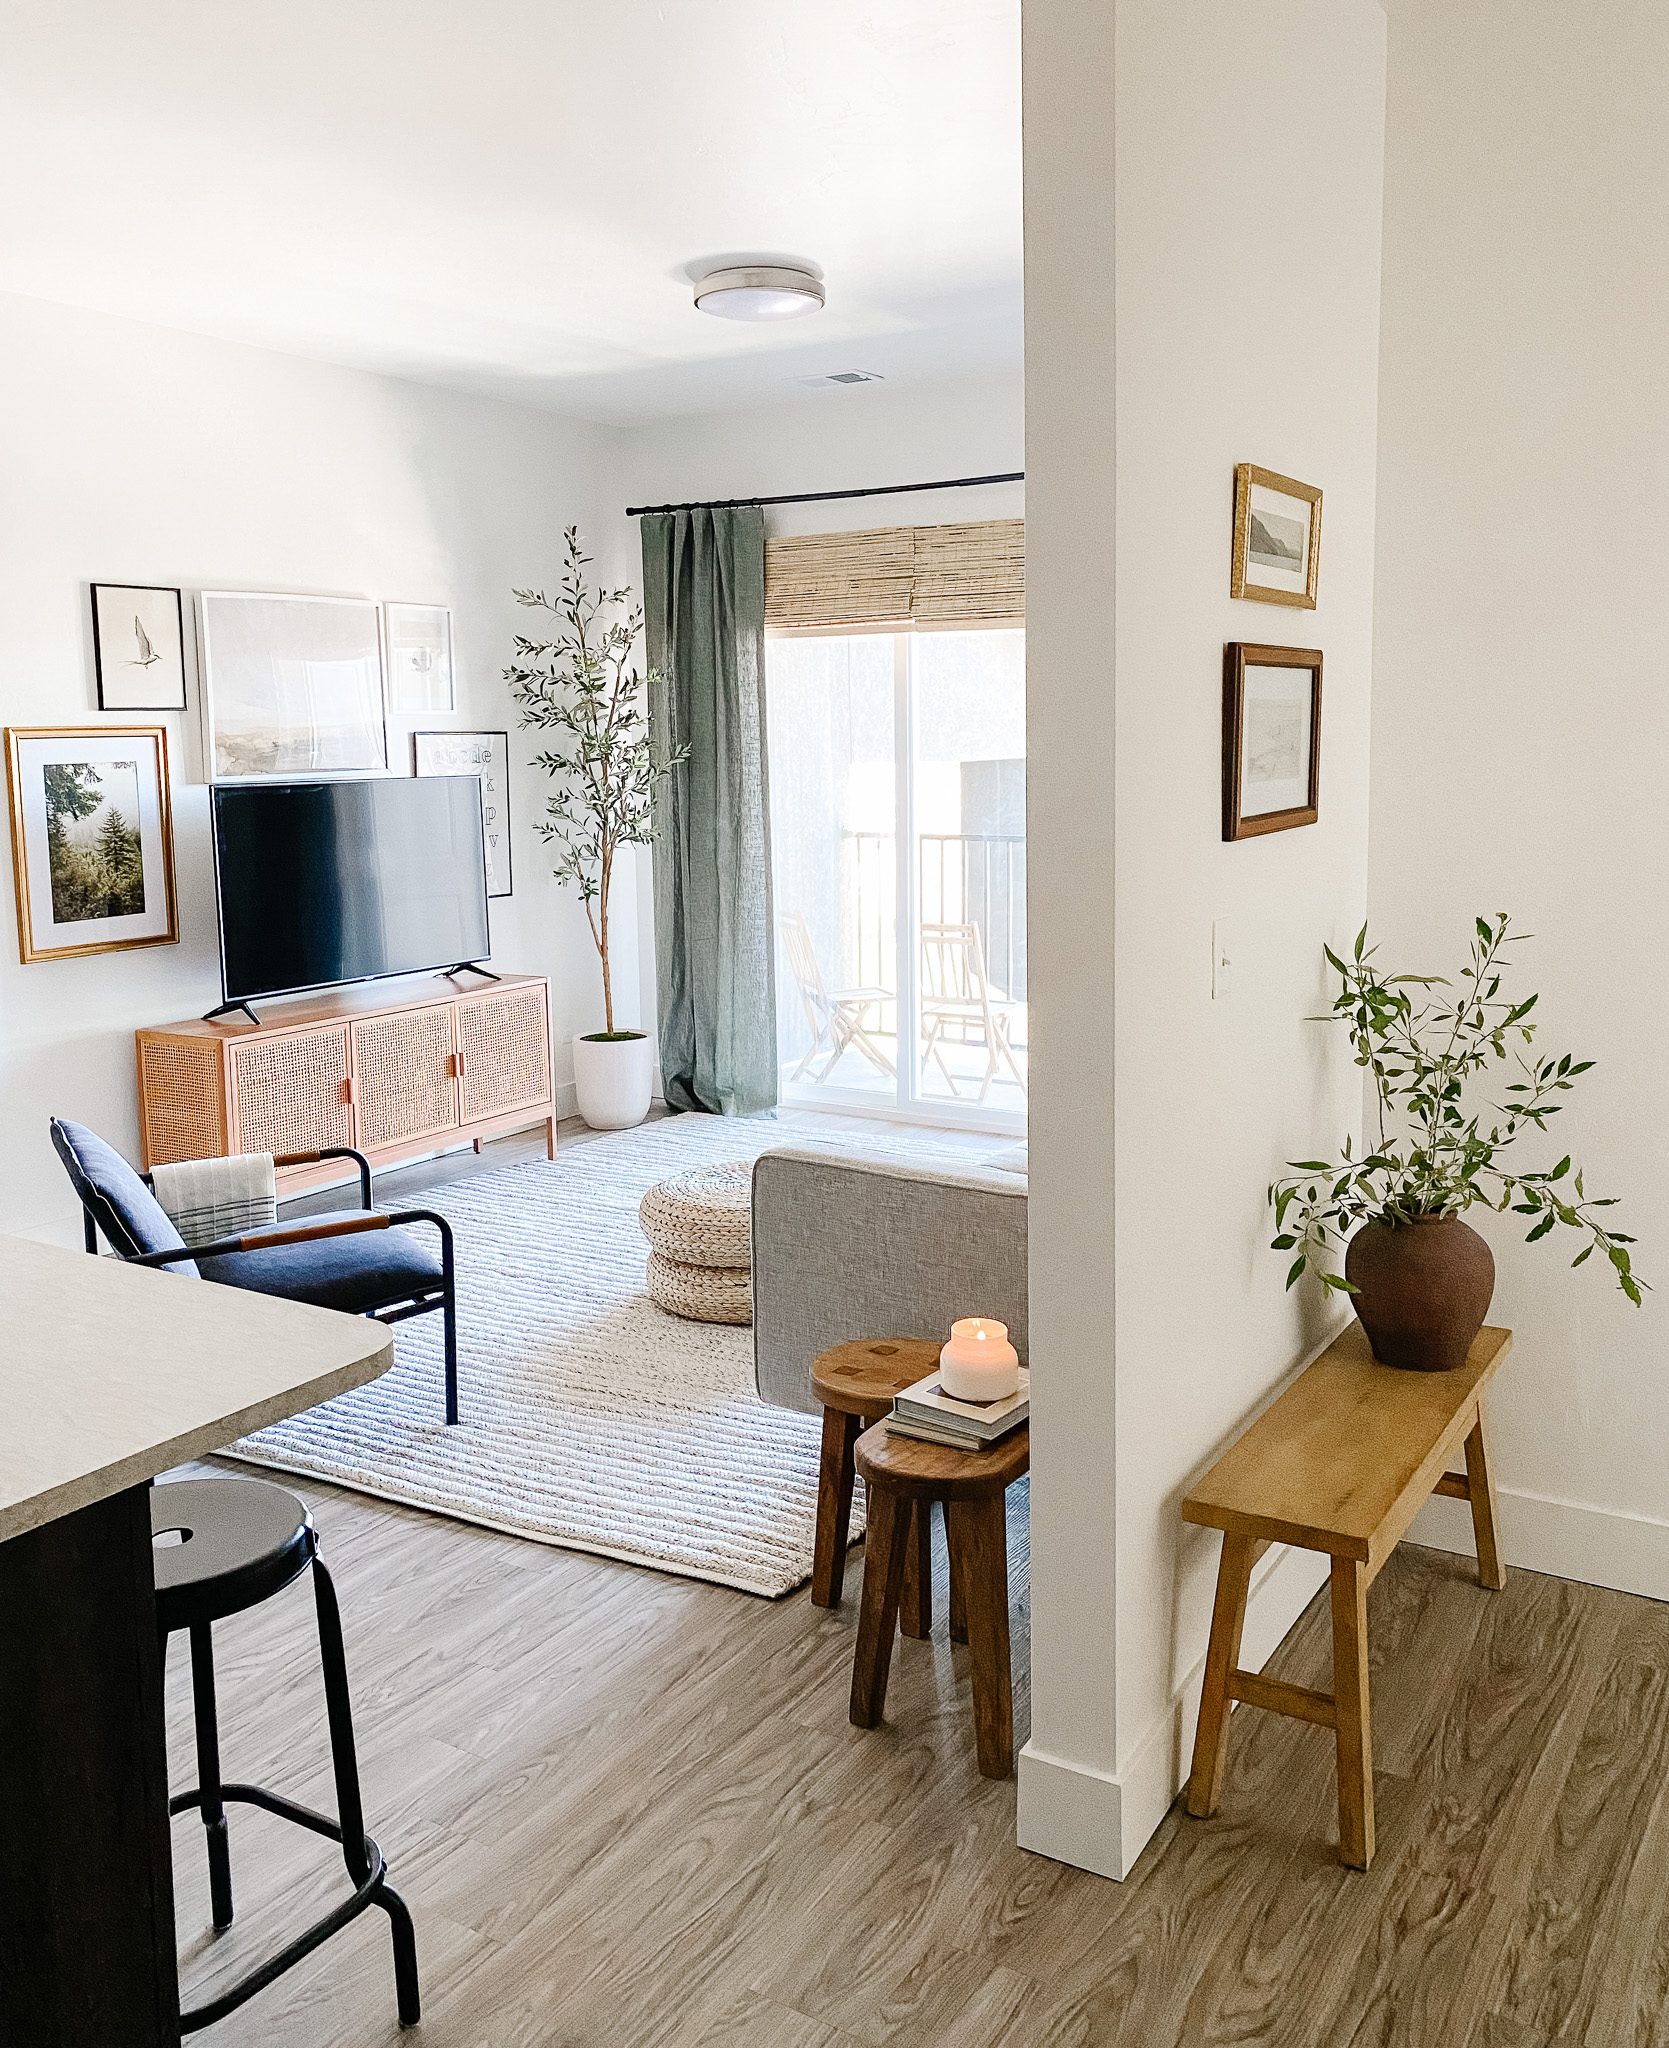 How to Decorate a Chic Modern Apartment on a Budget